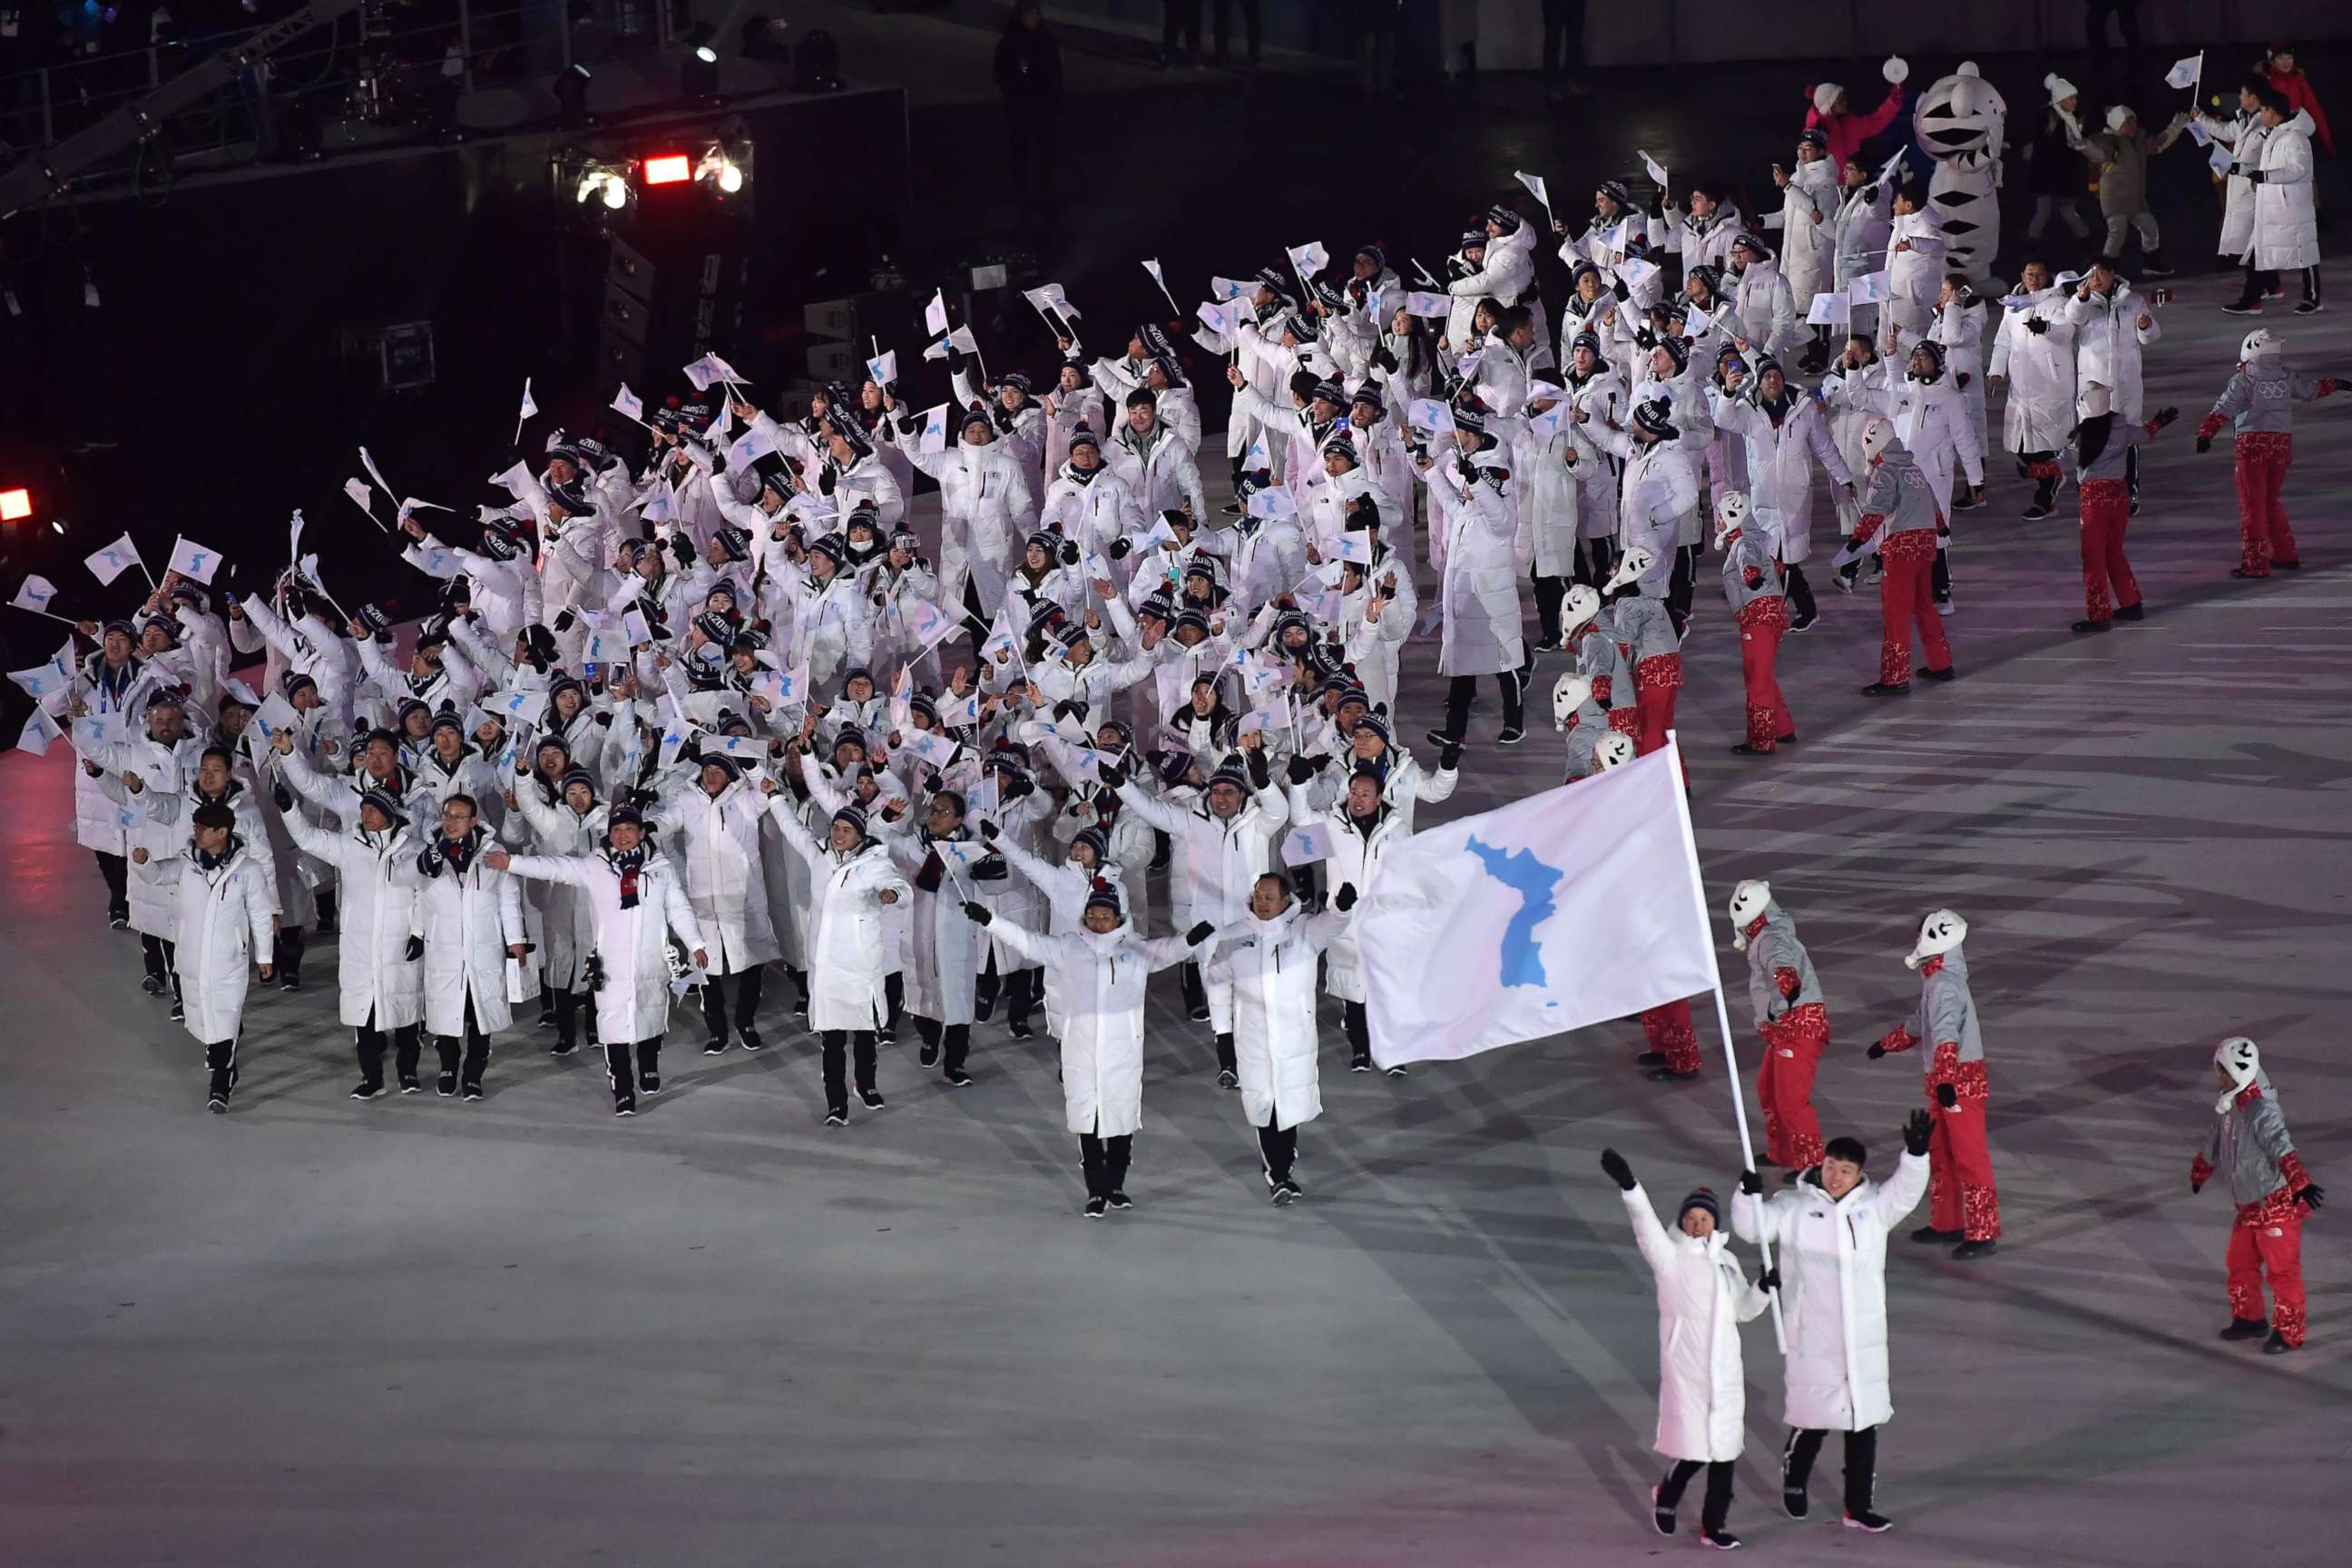 PHOTO: Unified Korea's flag-bearers, North Korean Hwang Chung Gum and South Korean Won Yun-jong, lead the Unified Korea's delegation as they parade during the opening ceremony of the Pyeongchang 2018 Winter Olympic Games on Feb. 9, 2018.